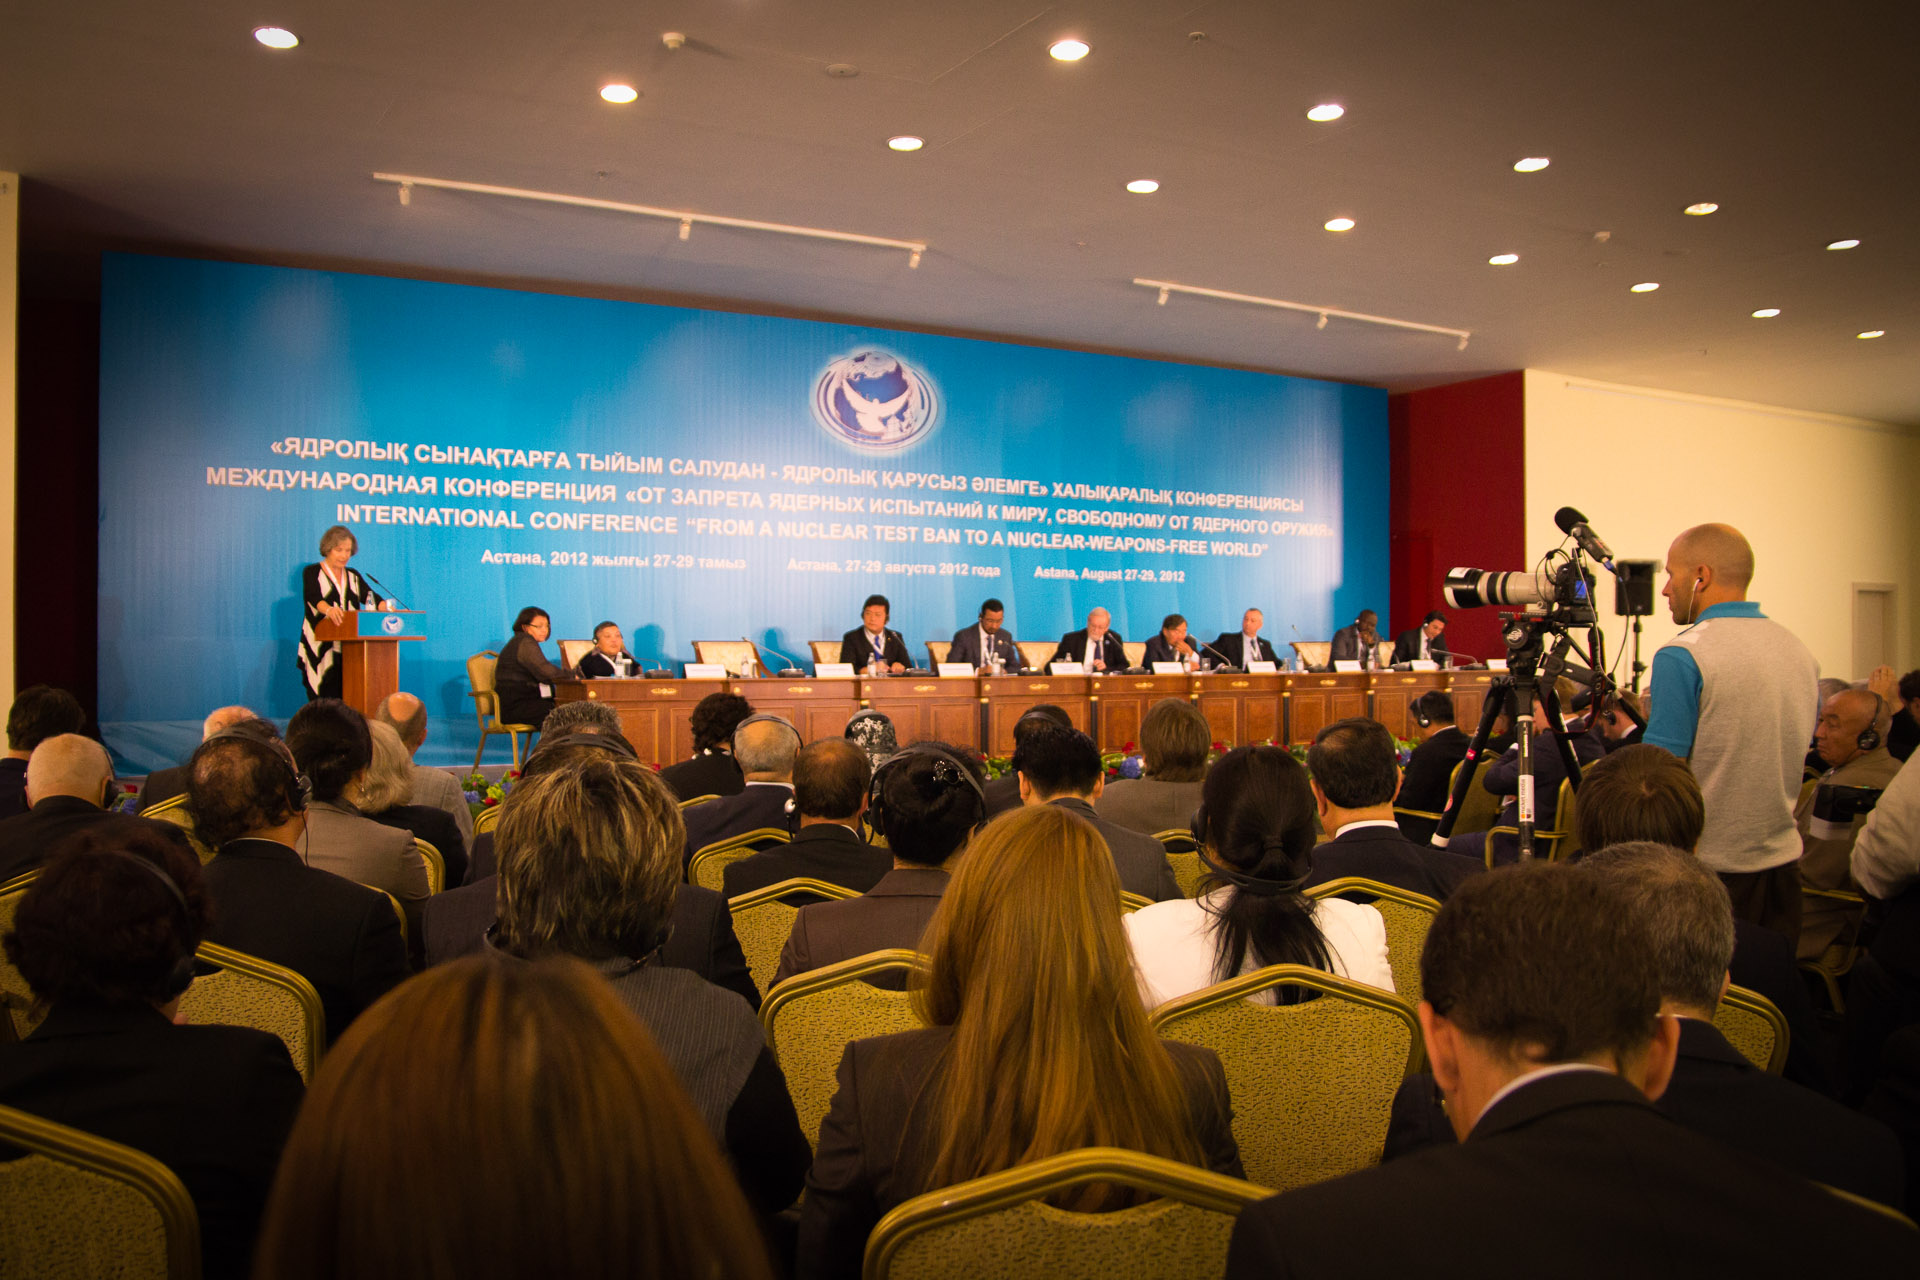 Panel 1: Comprehensive Test Ban Treaty – a Building block for a nuclear-weapons-free world